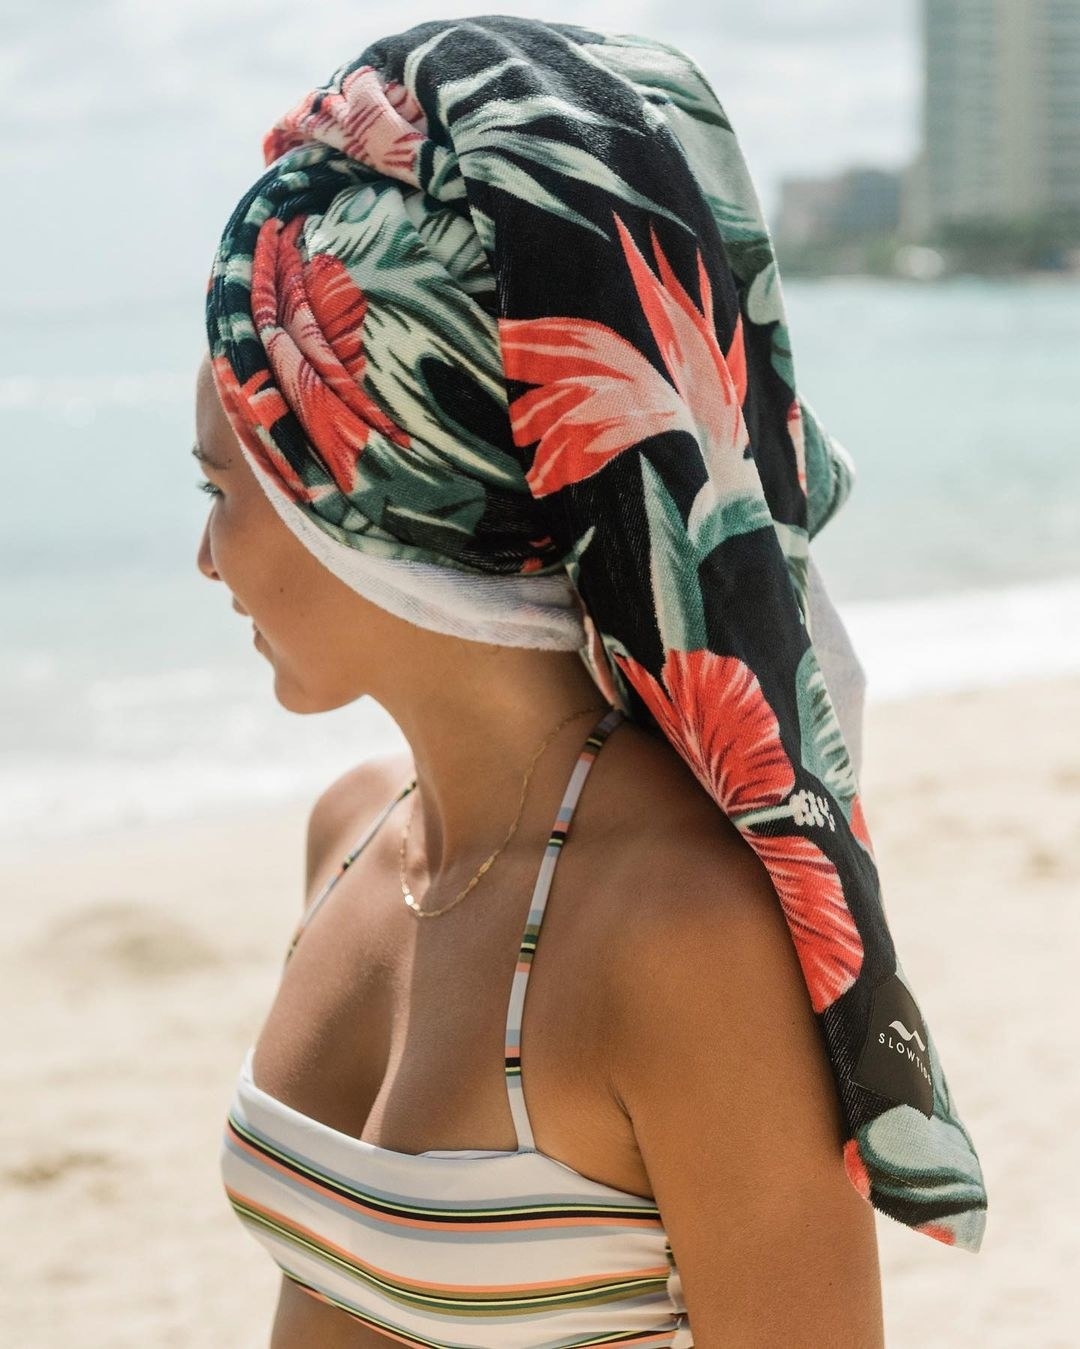 A person wearing the floral-printed beach towel on their head